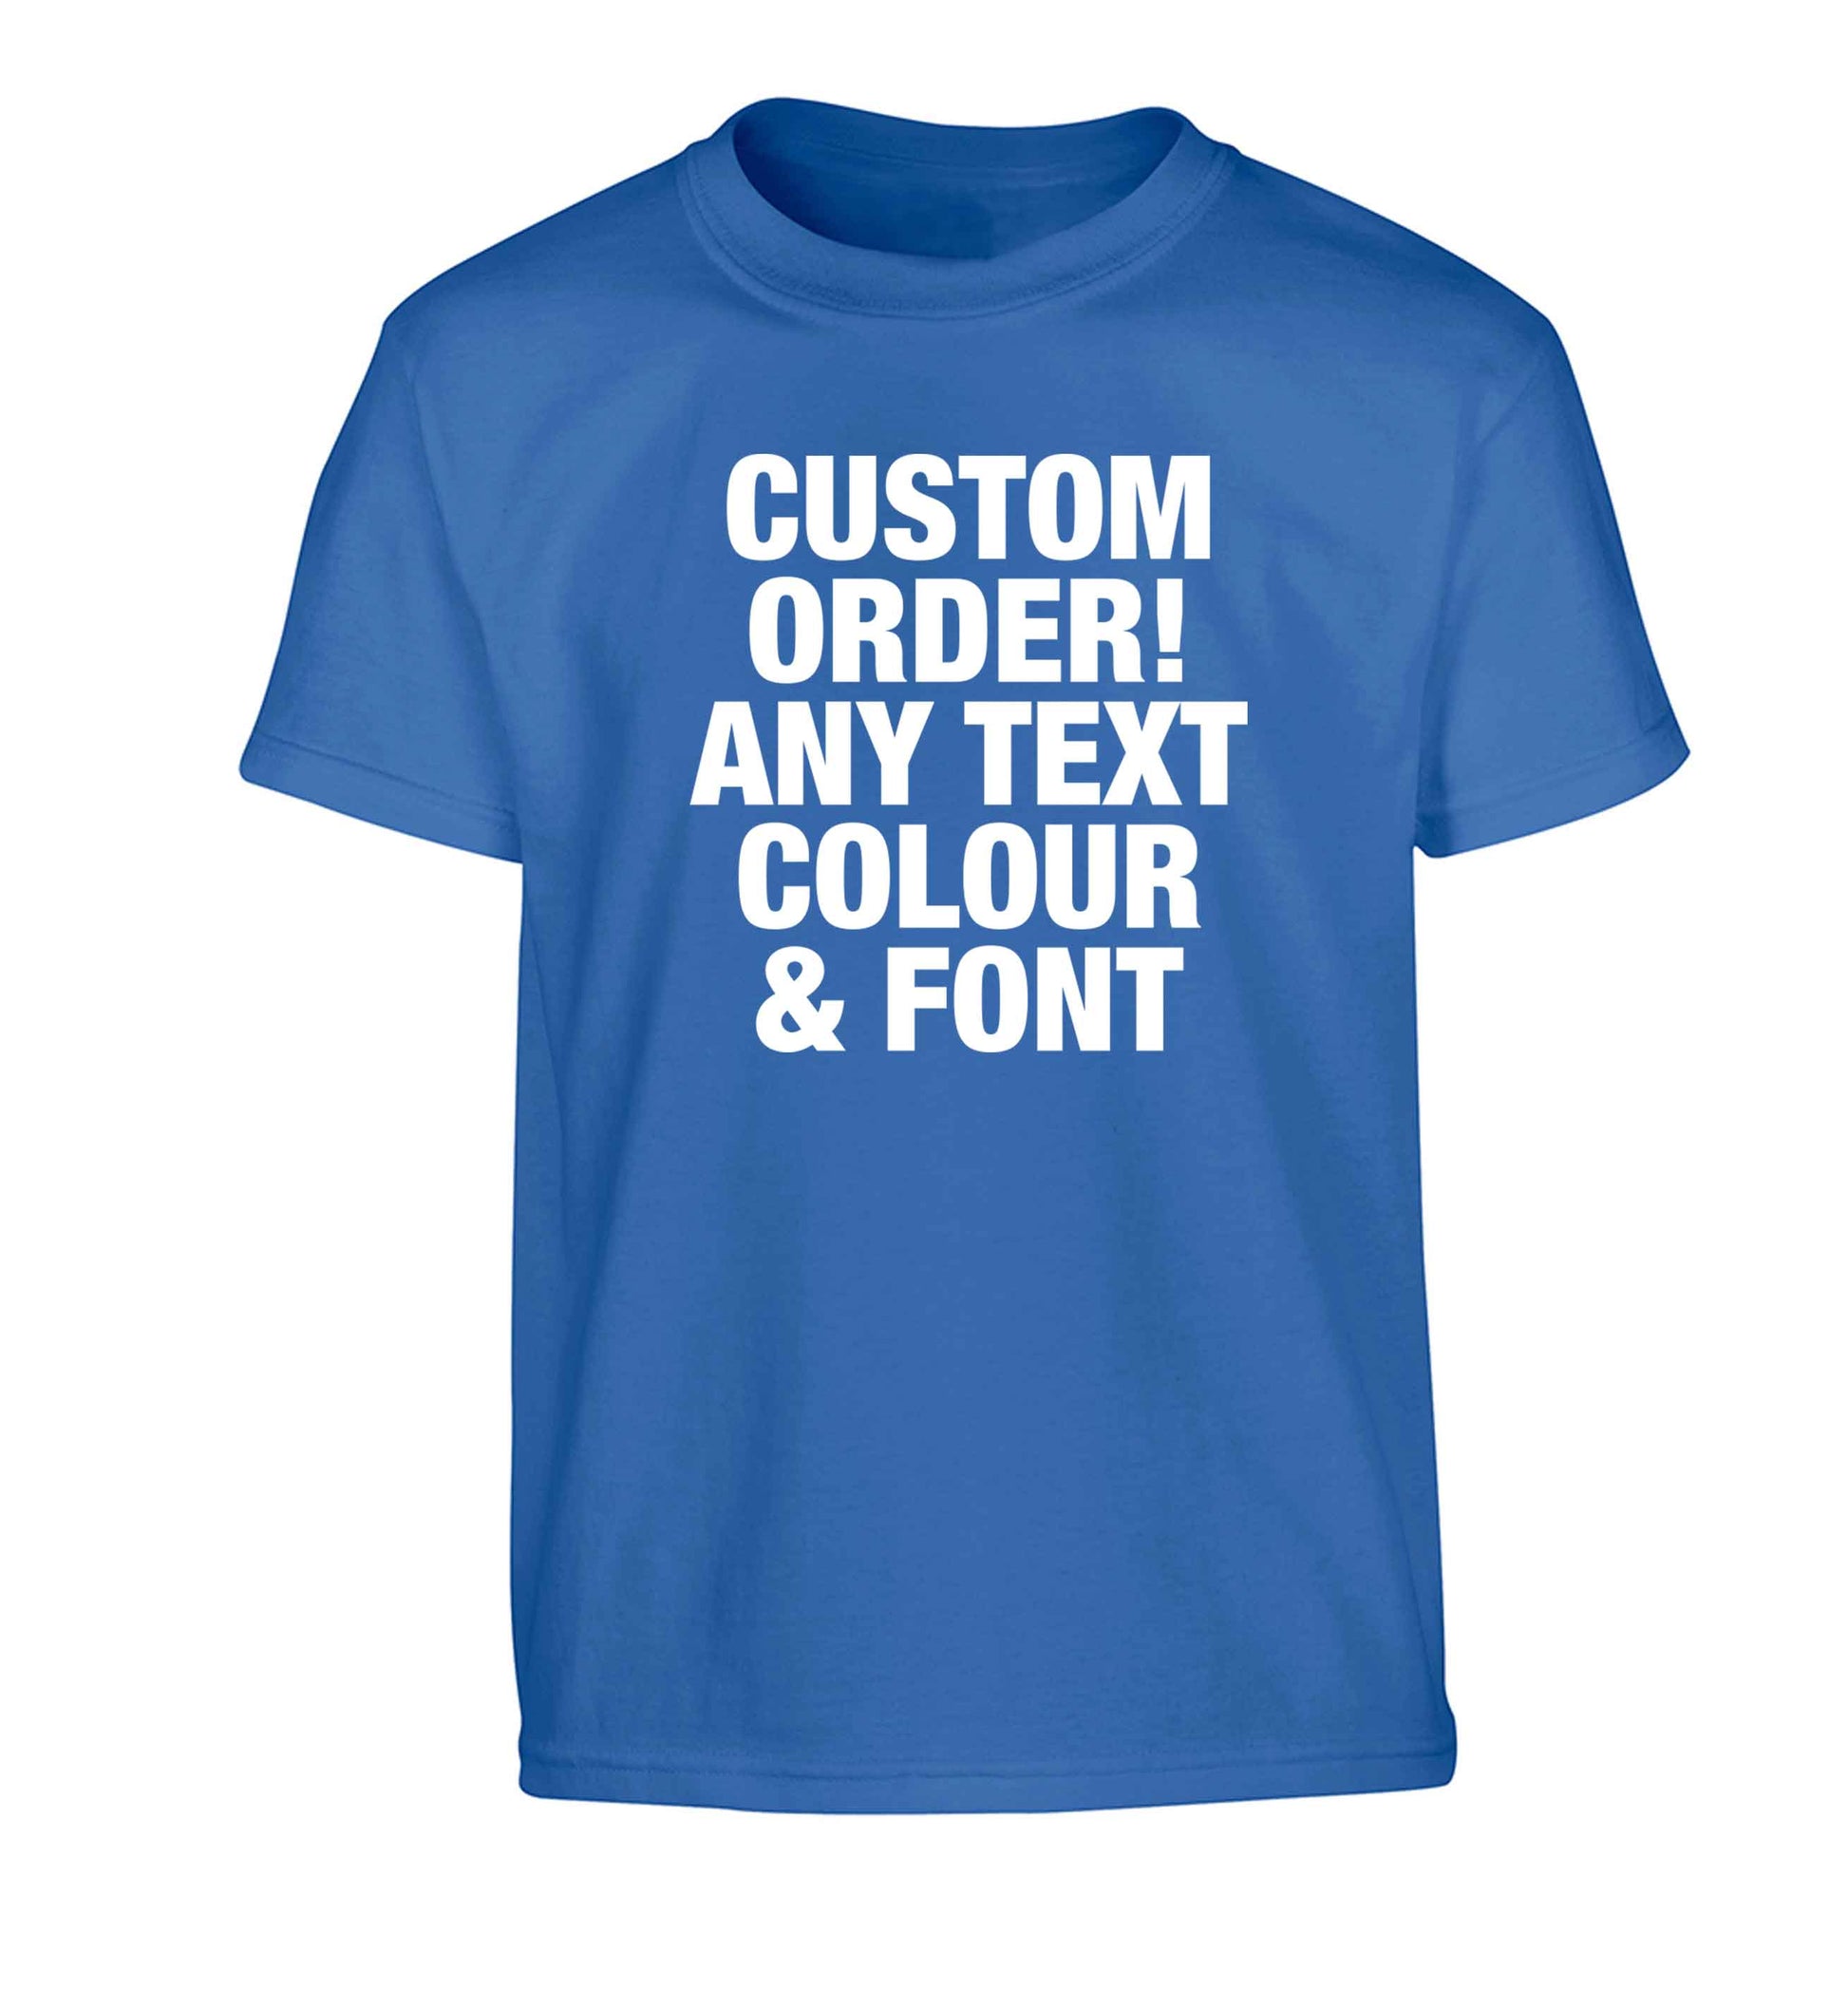 Custom order any text colour and font Children's blue Tshirt 12-13 Years